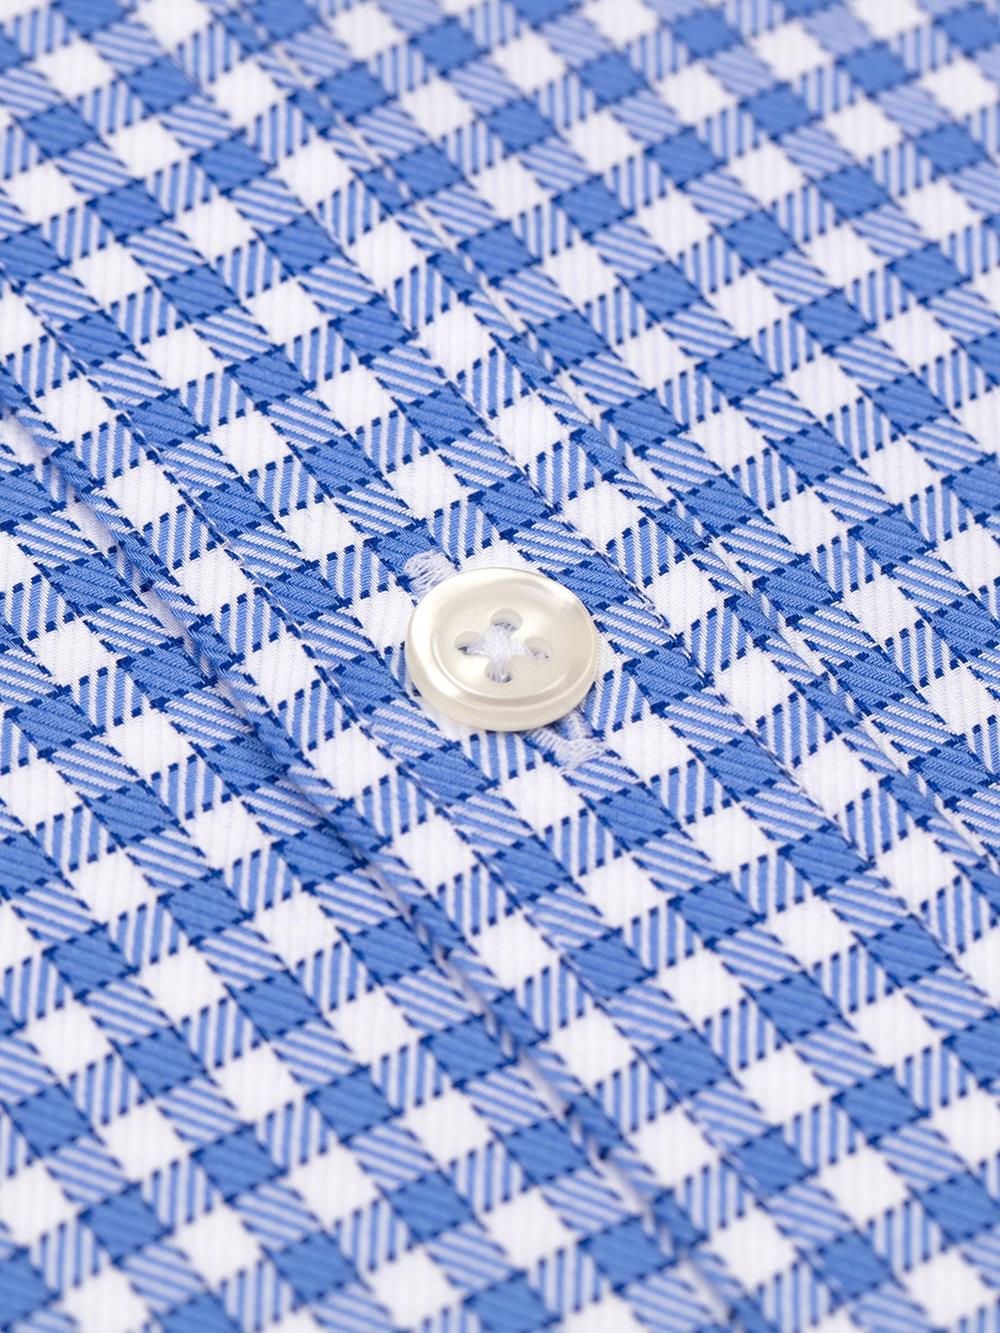 Mark fitted shirt - Buttoned collar